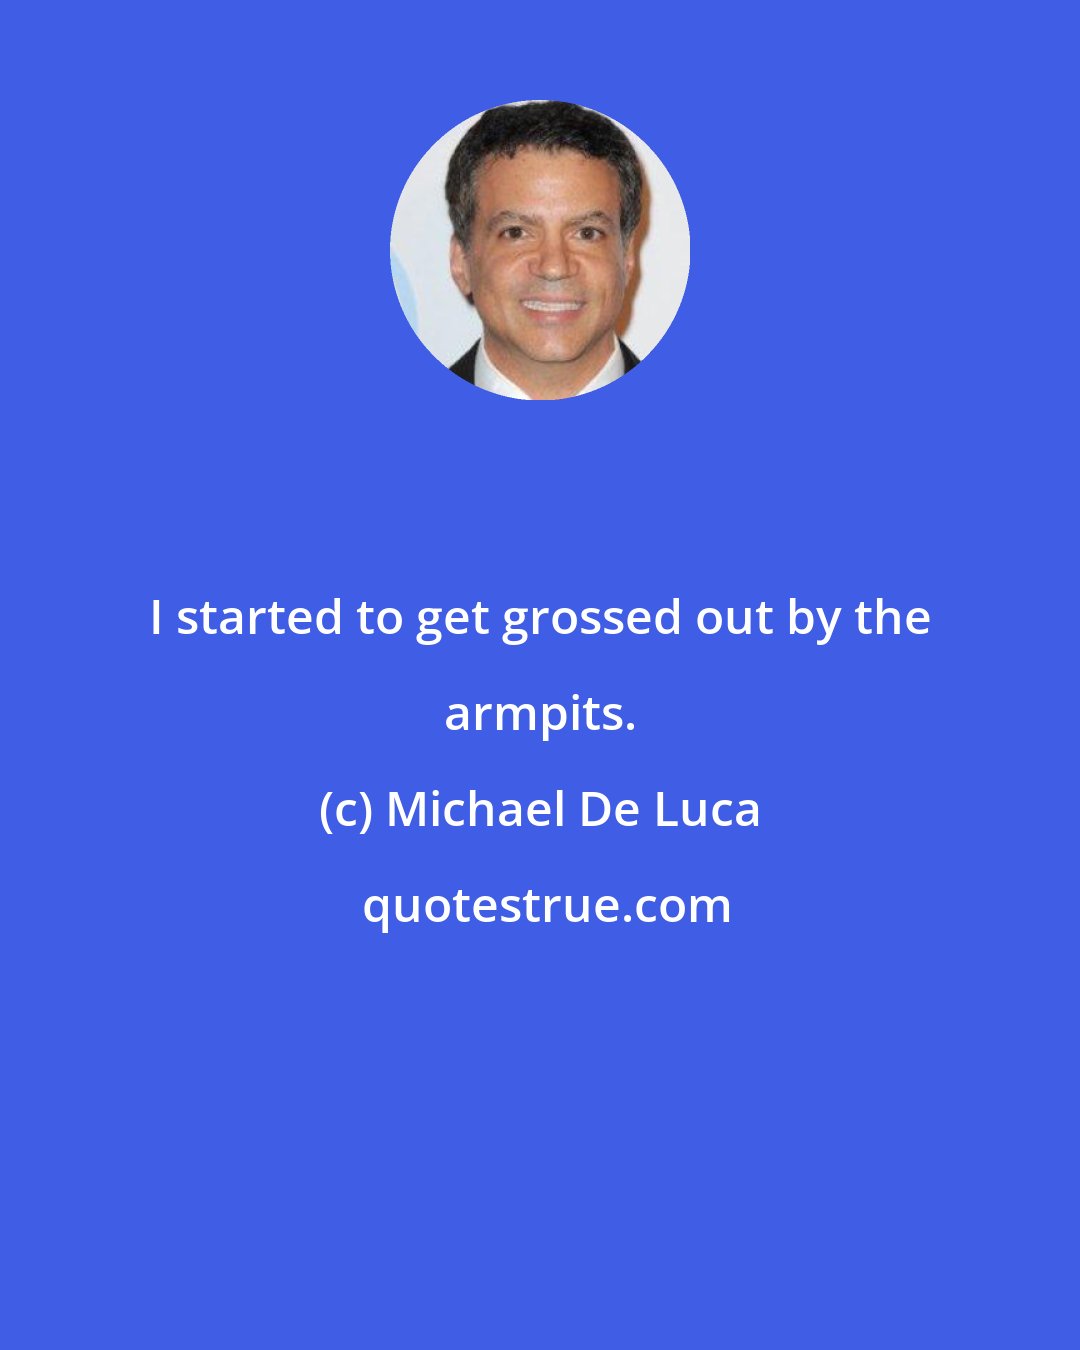 Michael De Luca: I started to get grossed out by the armpits.